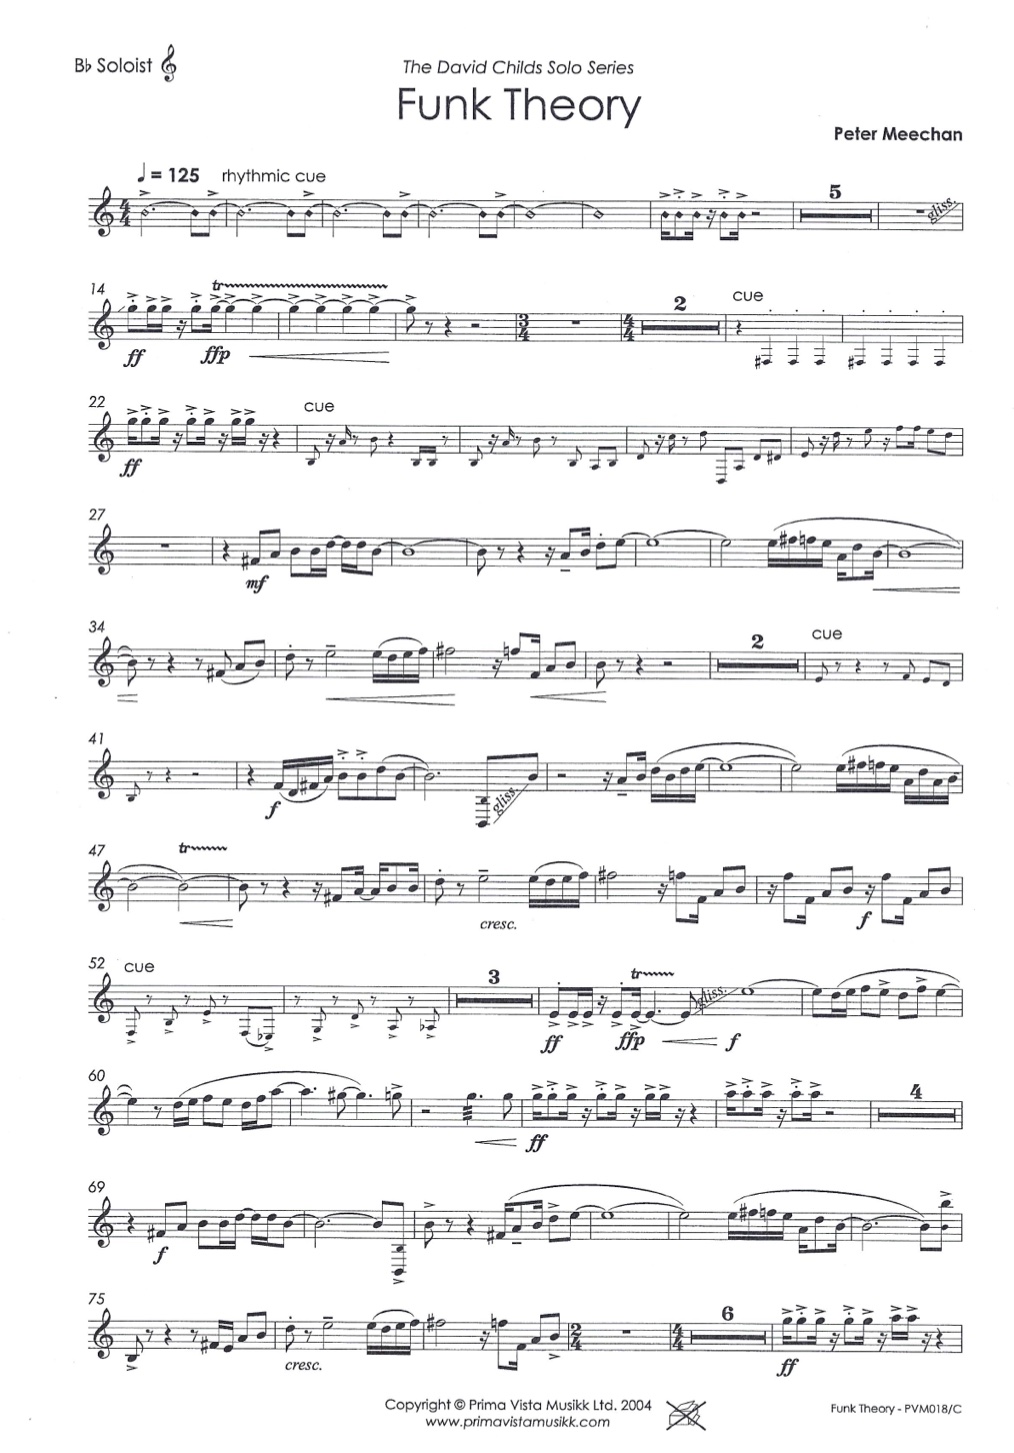 Do Re Mi - Melody Solfege - Chord - YWCM Sheet music for Piano (Solo) Easy